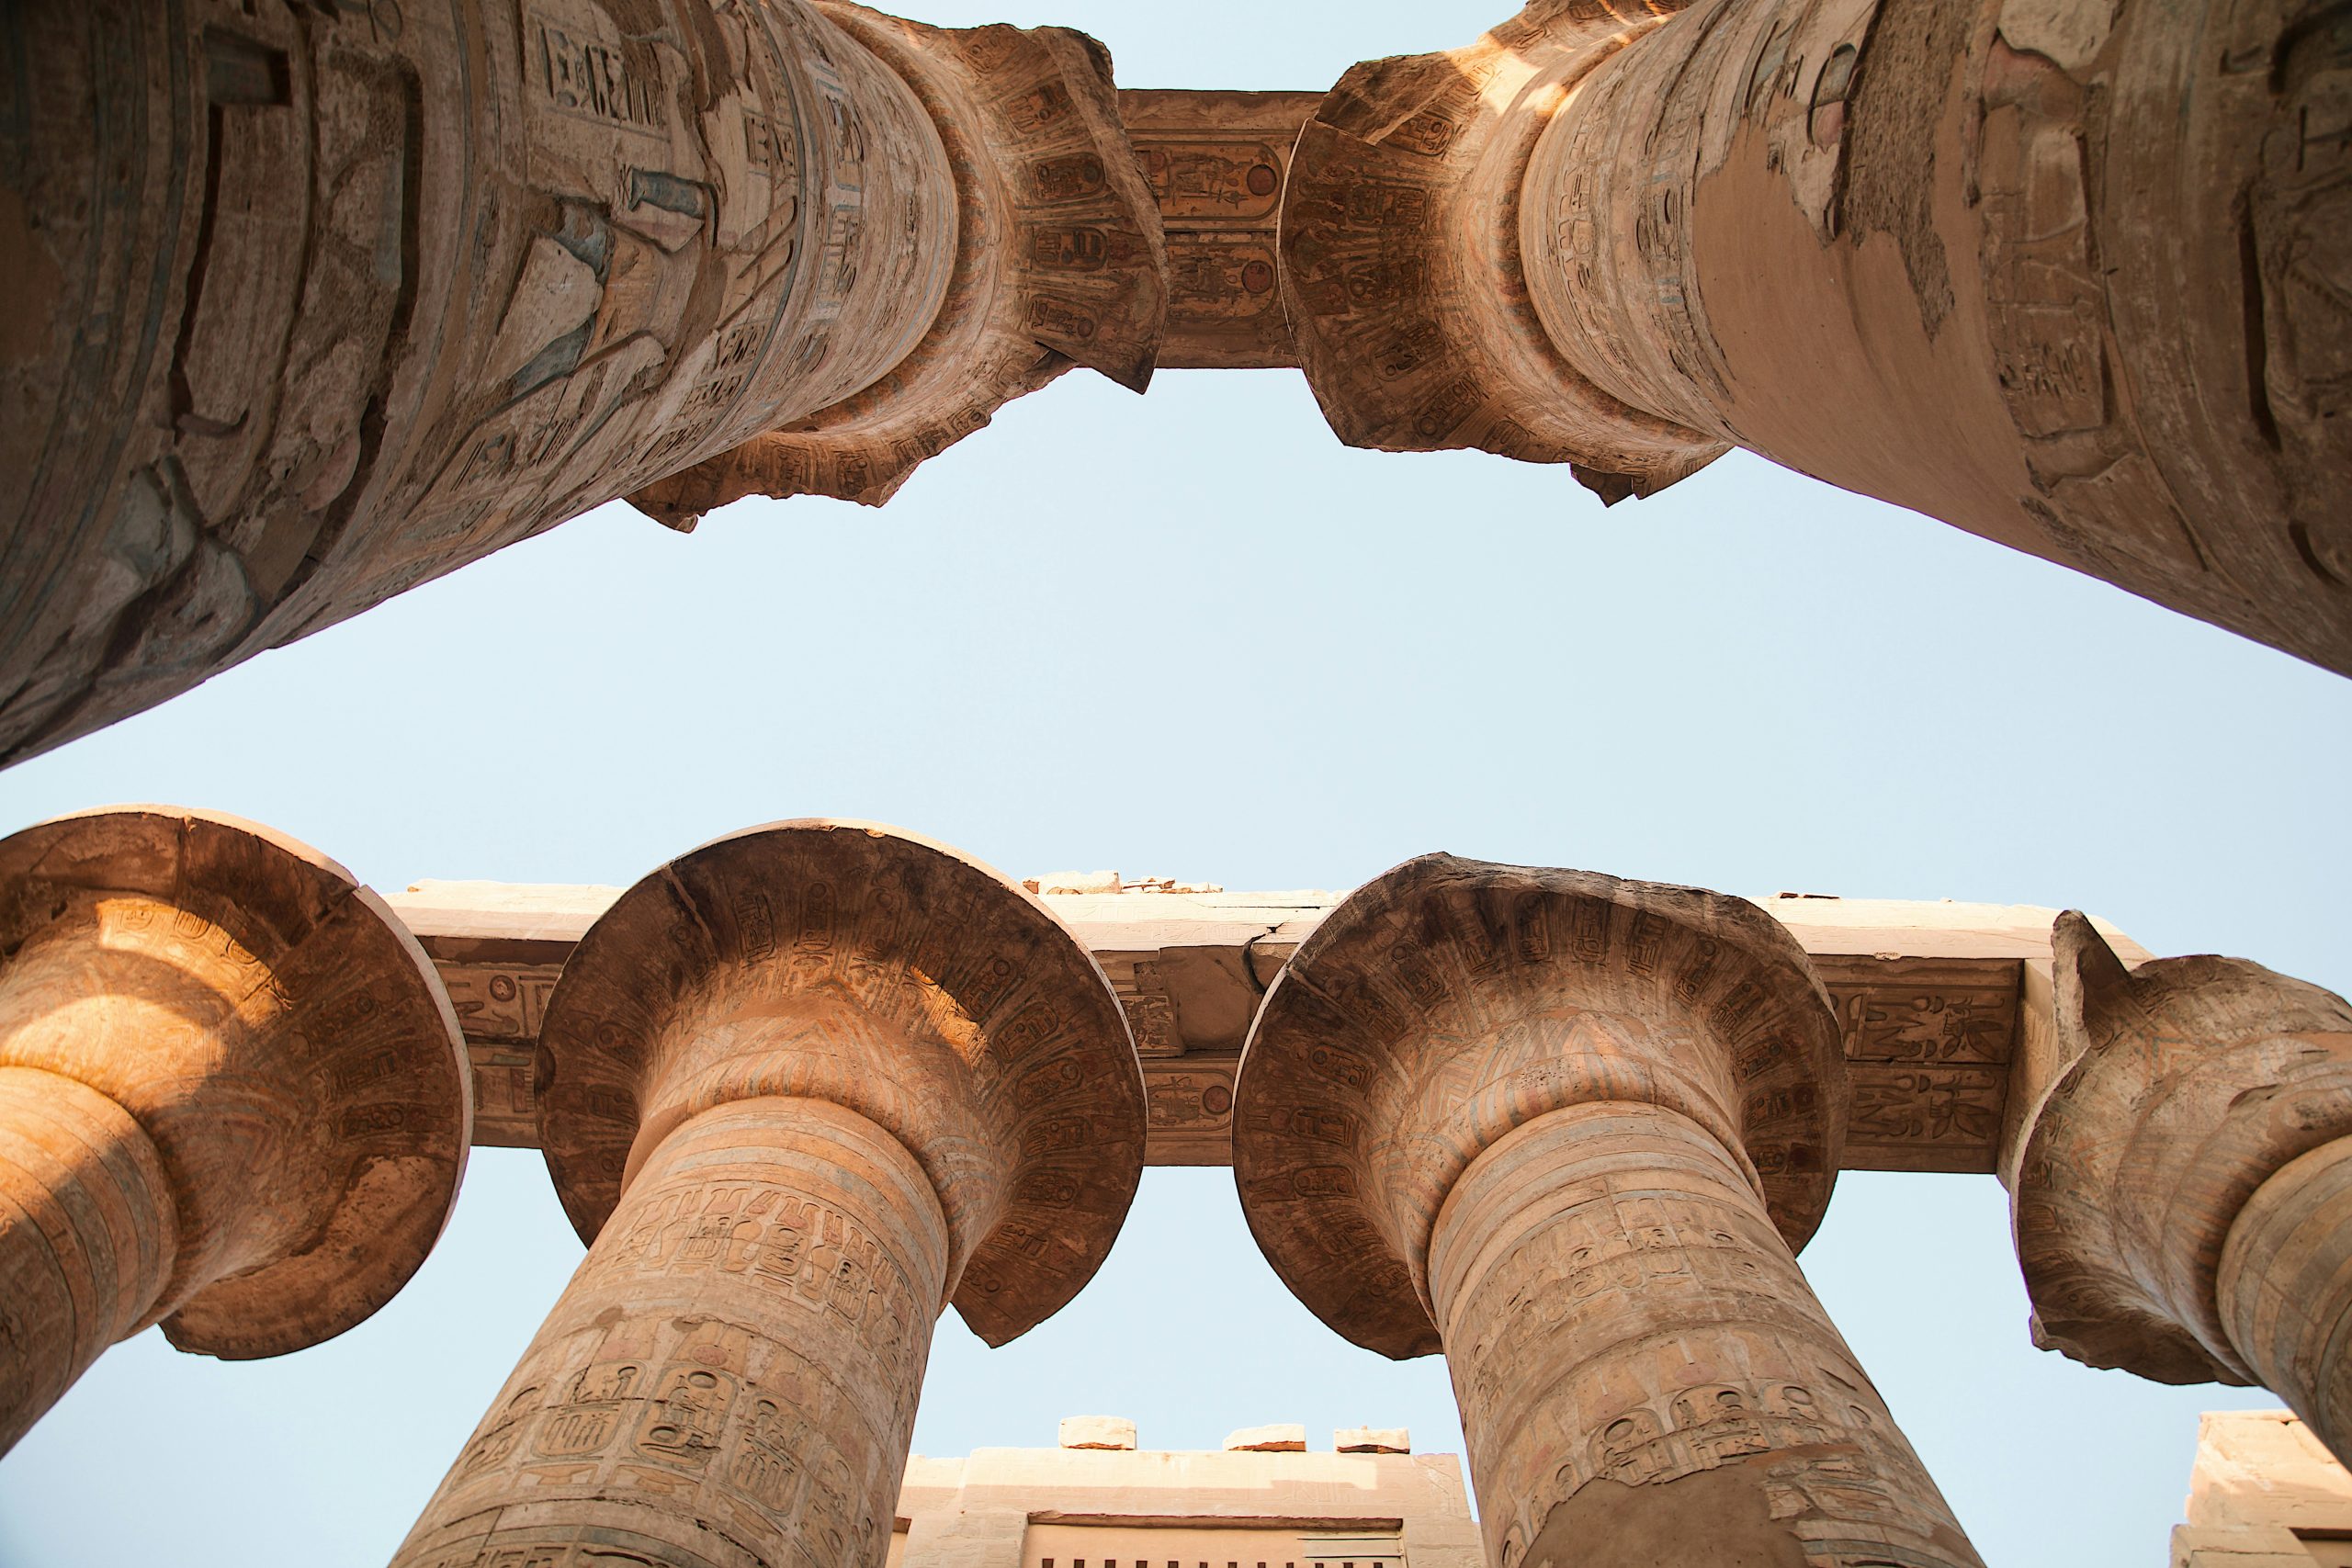 explore the vibrant sights and experiences of a nile cruise. discover ancient wonders and immerse yourself in the rich history and beauty of egypt.